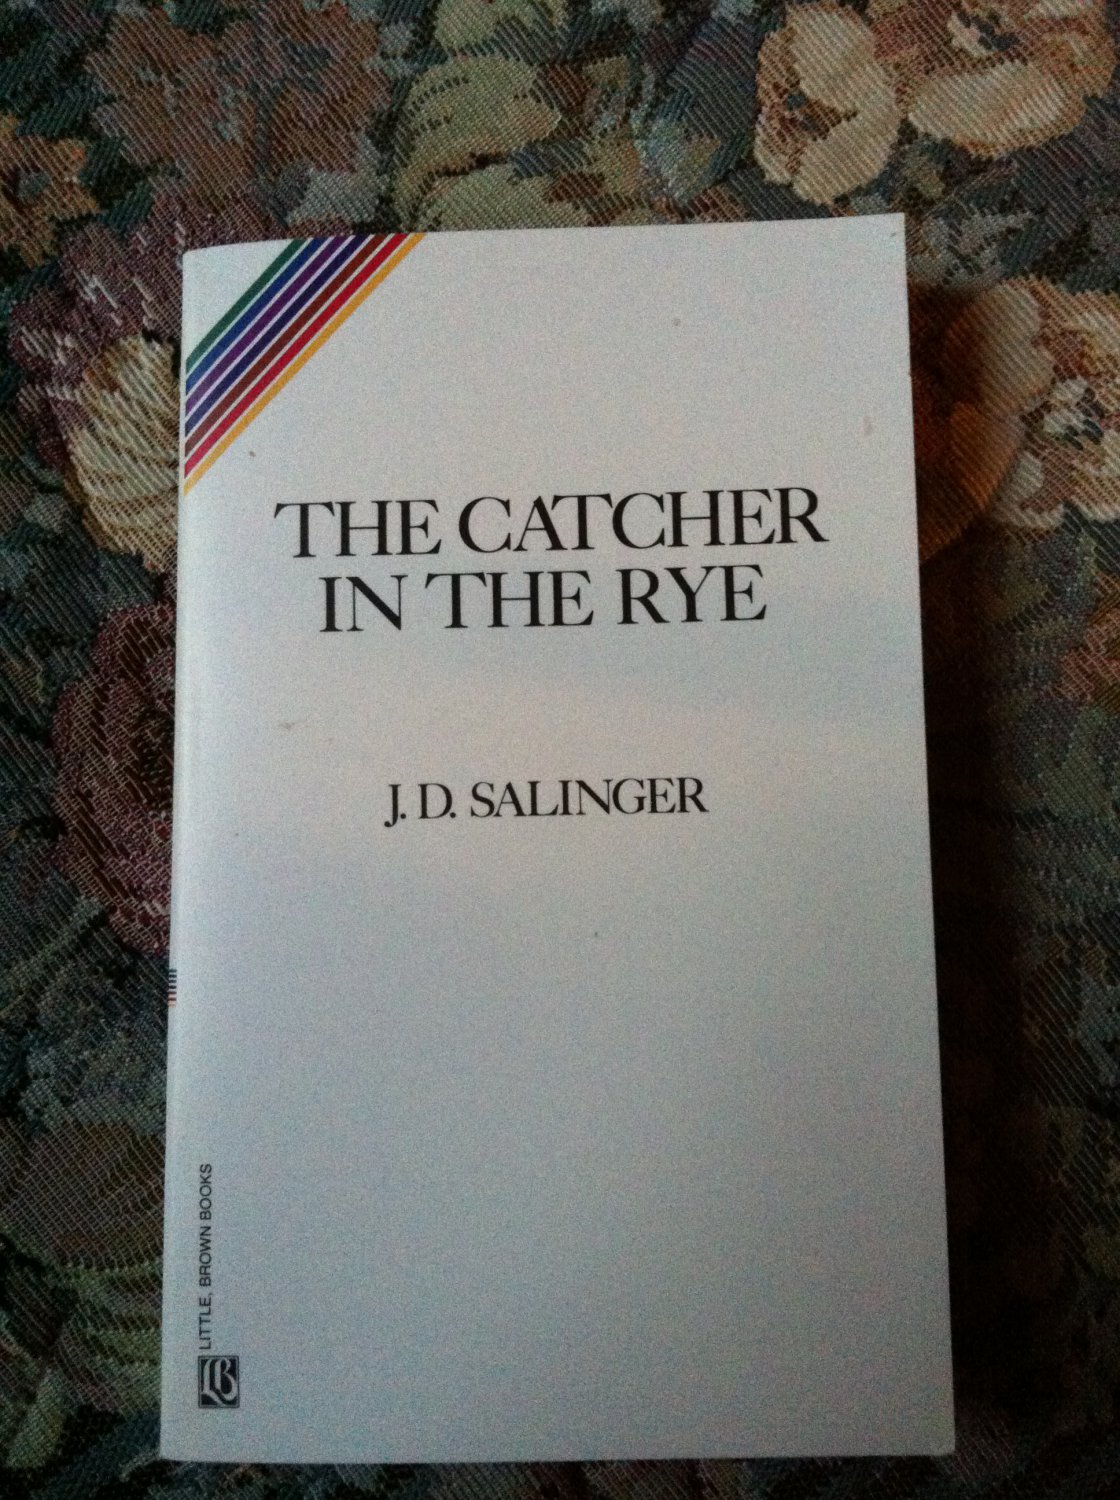 the catcher in the rye book online